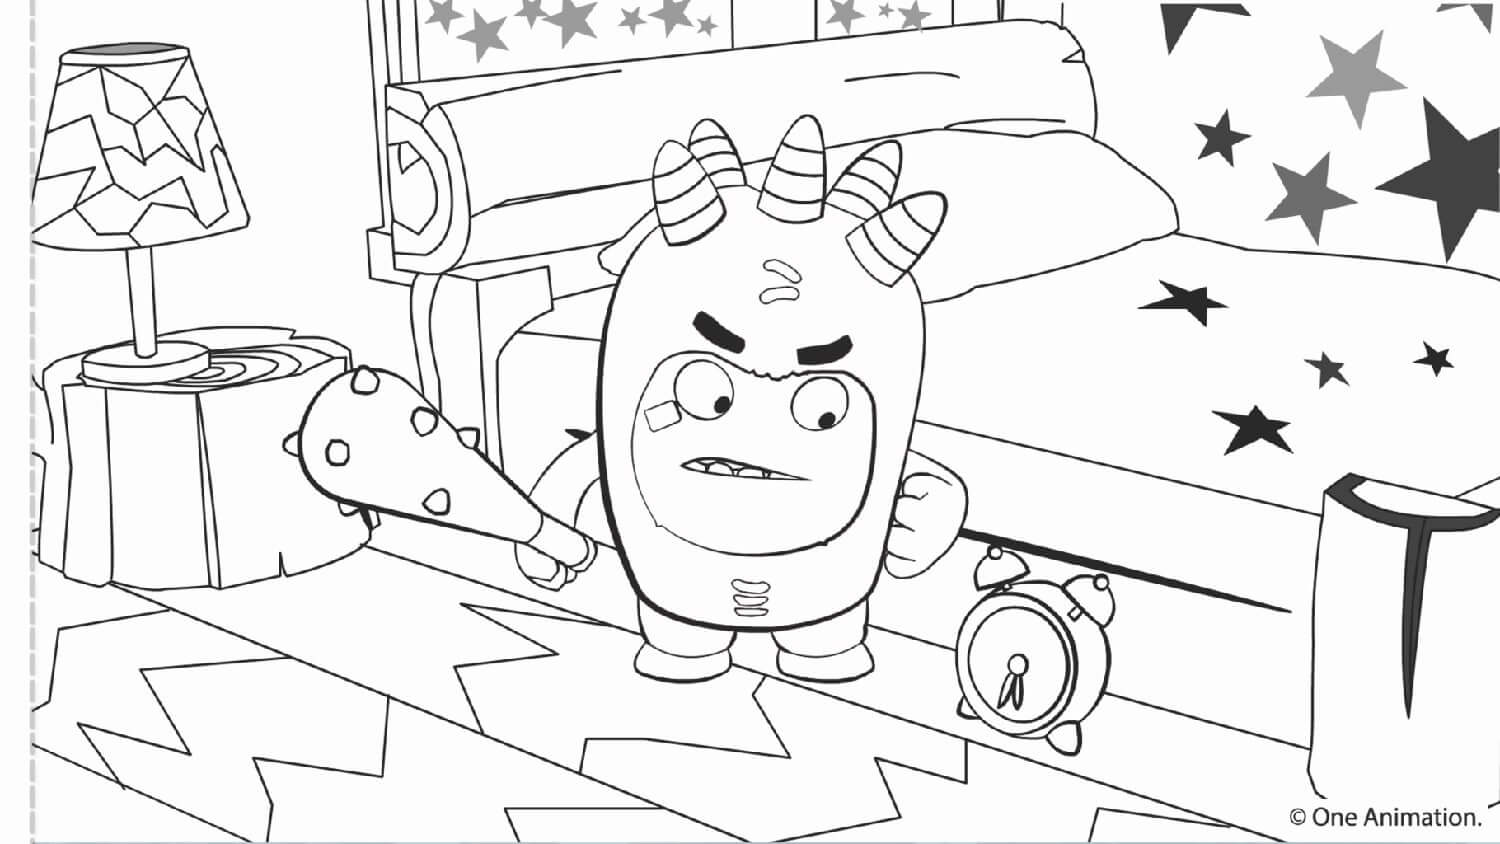 Pogo and Fuse Oddbods Coloring Page - Free Printable Coloring Pages for